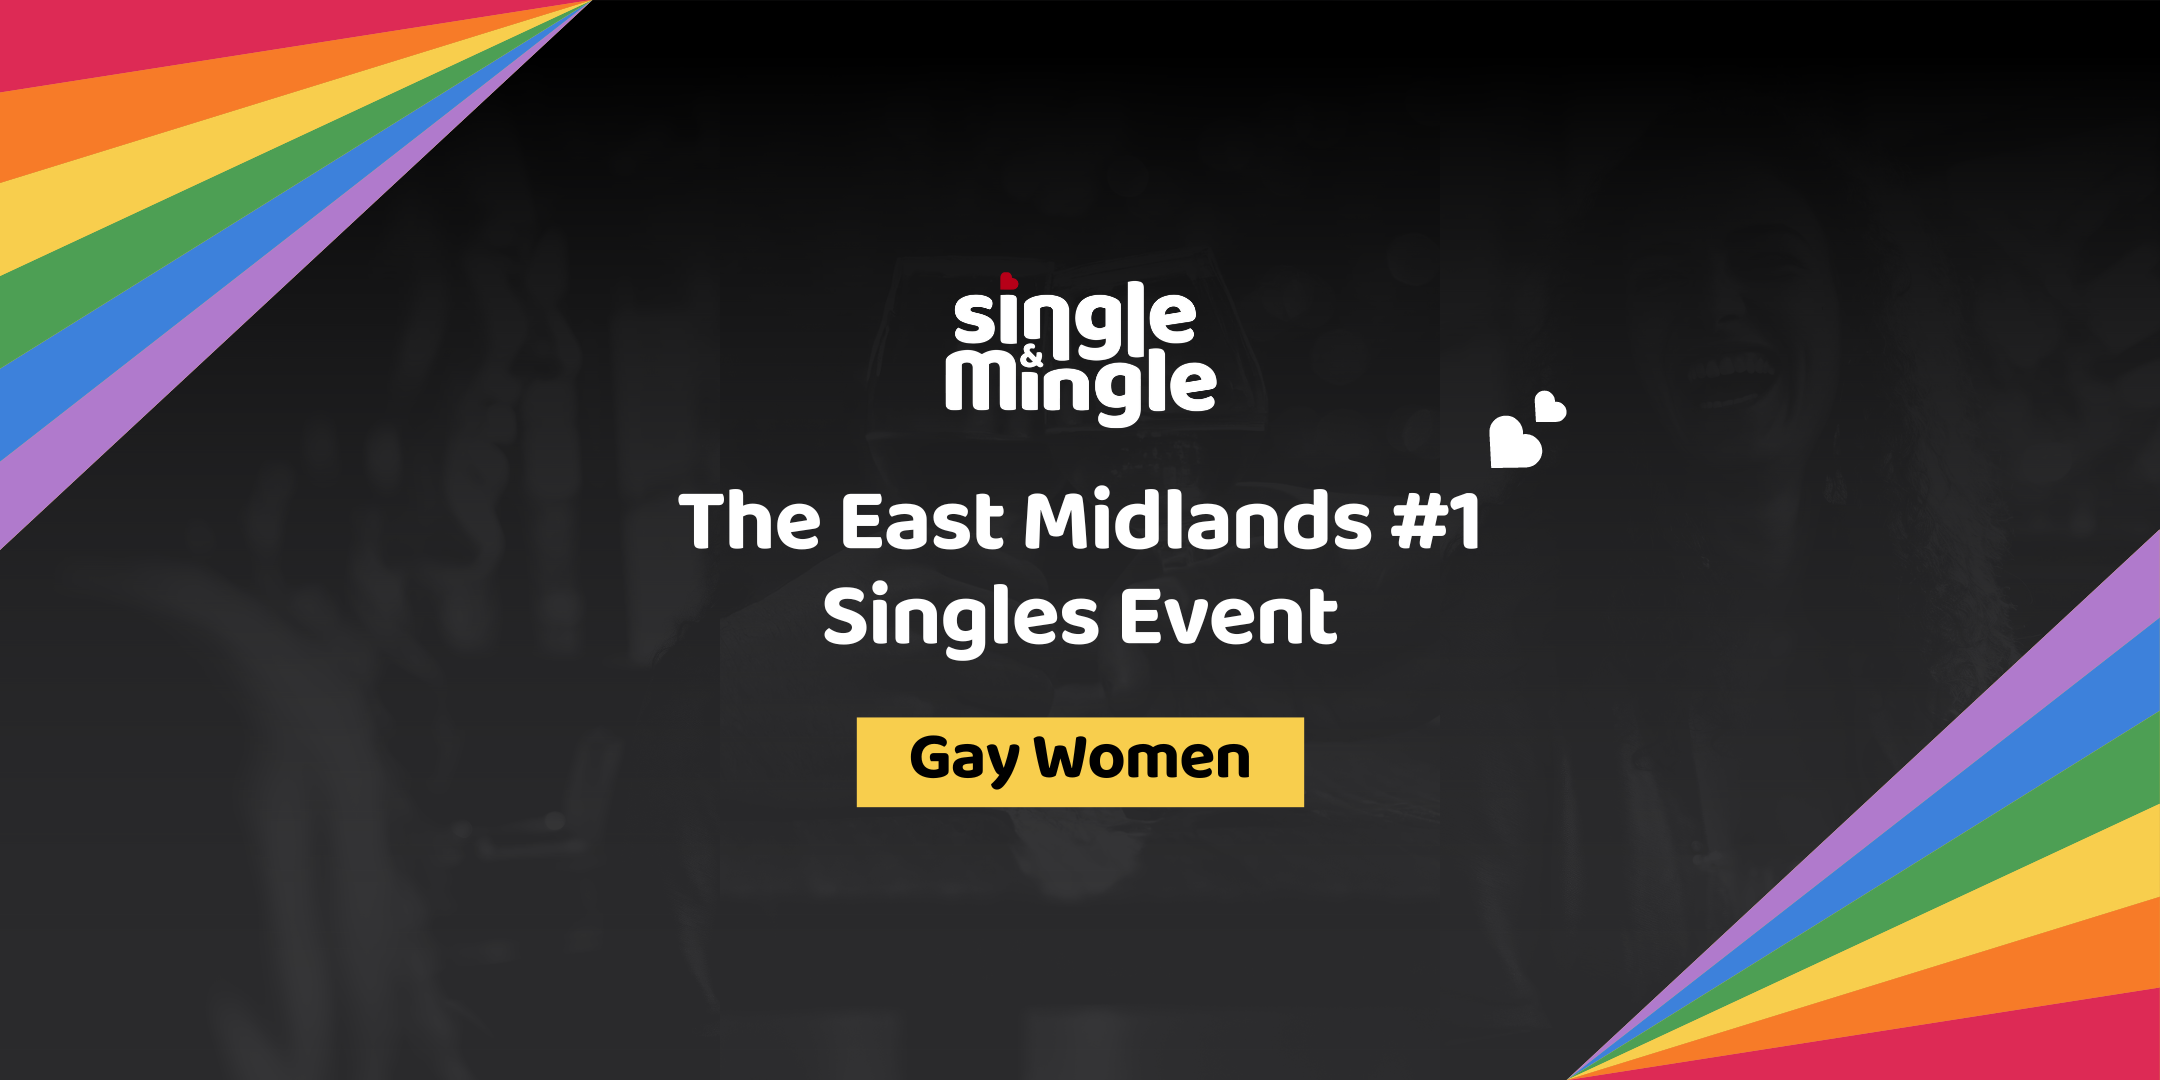 Single & Mingle's event for Gay Women